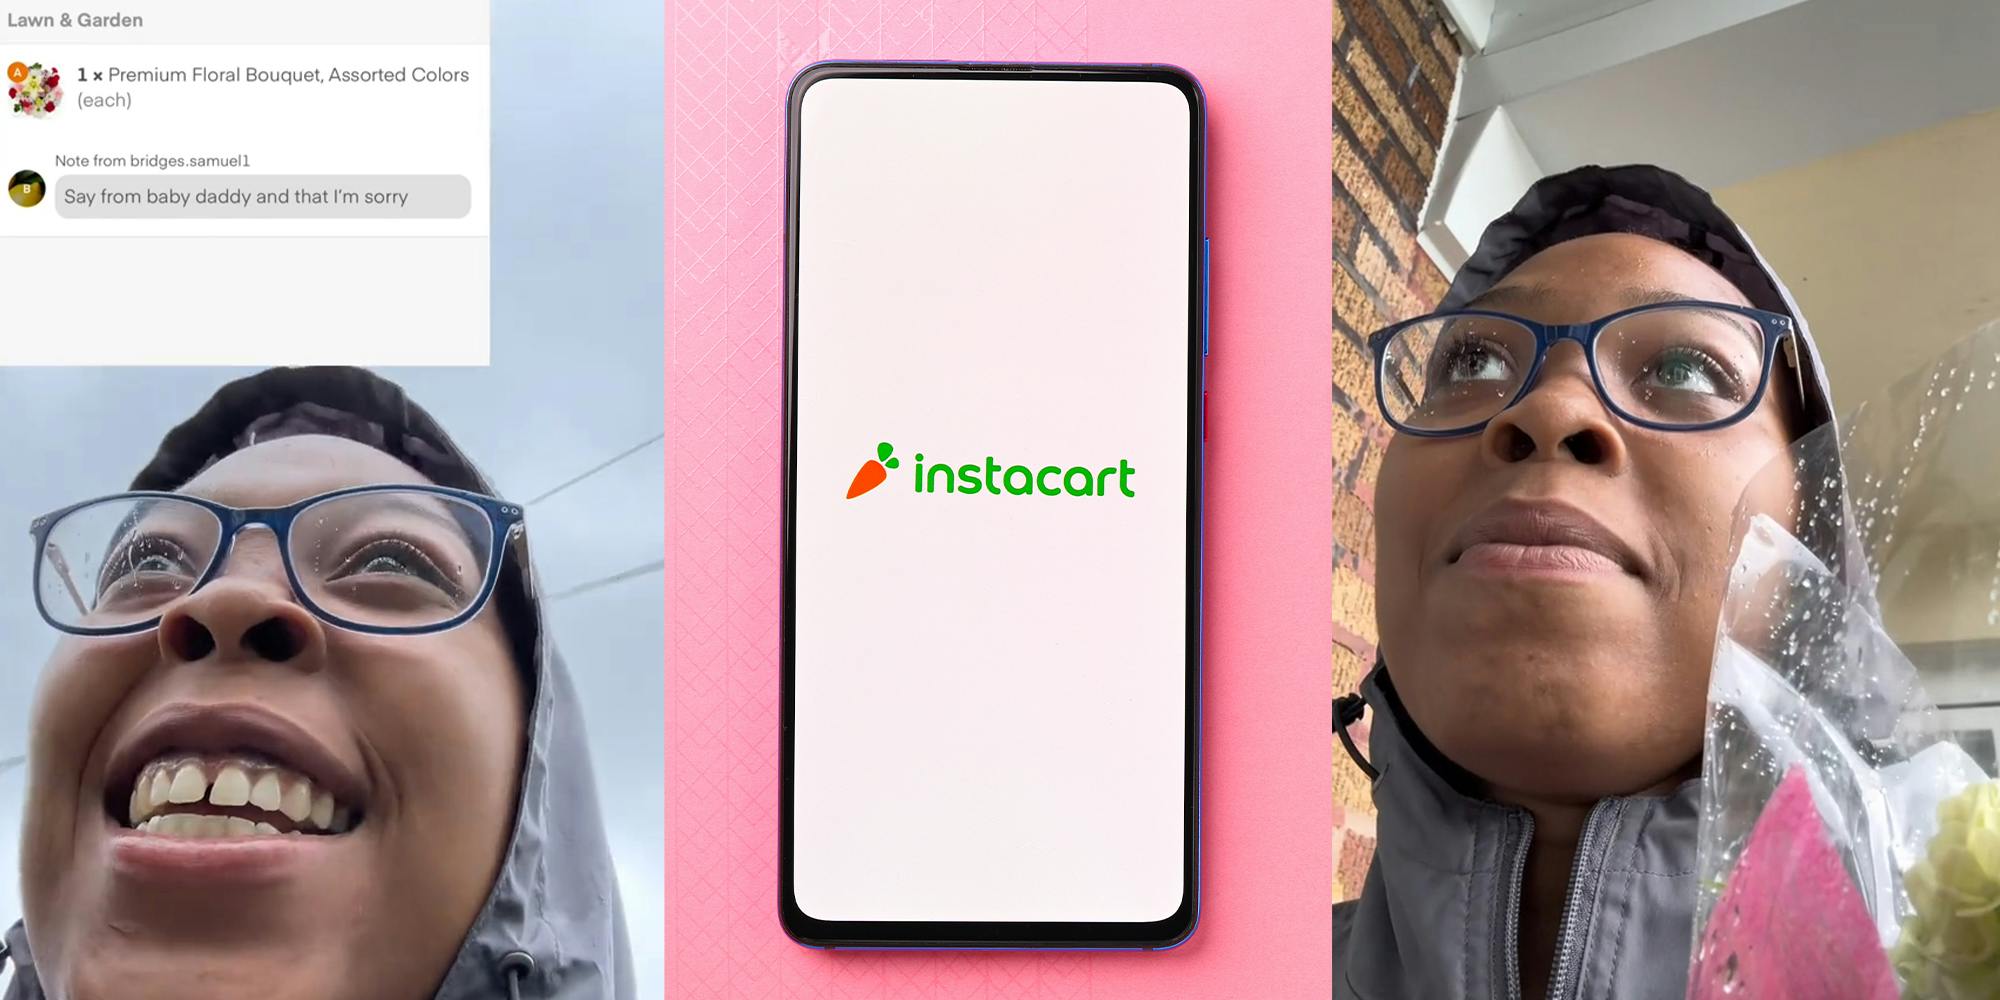 Instacart shopper says customer asked her to deliver flowers